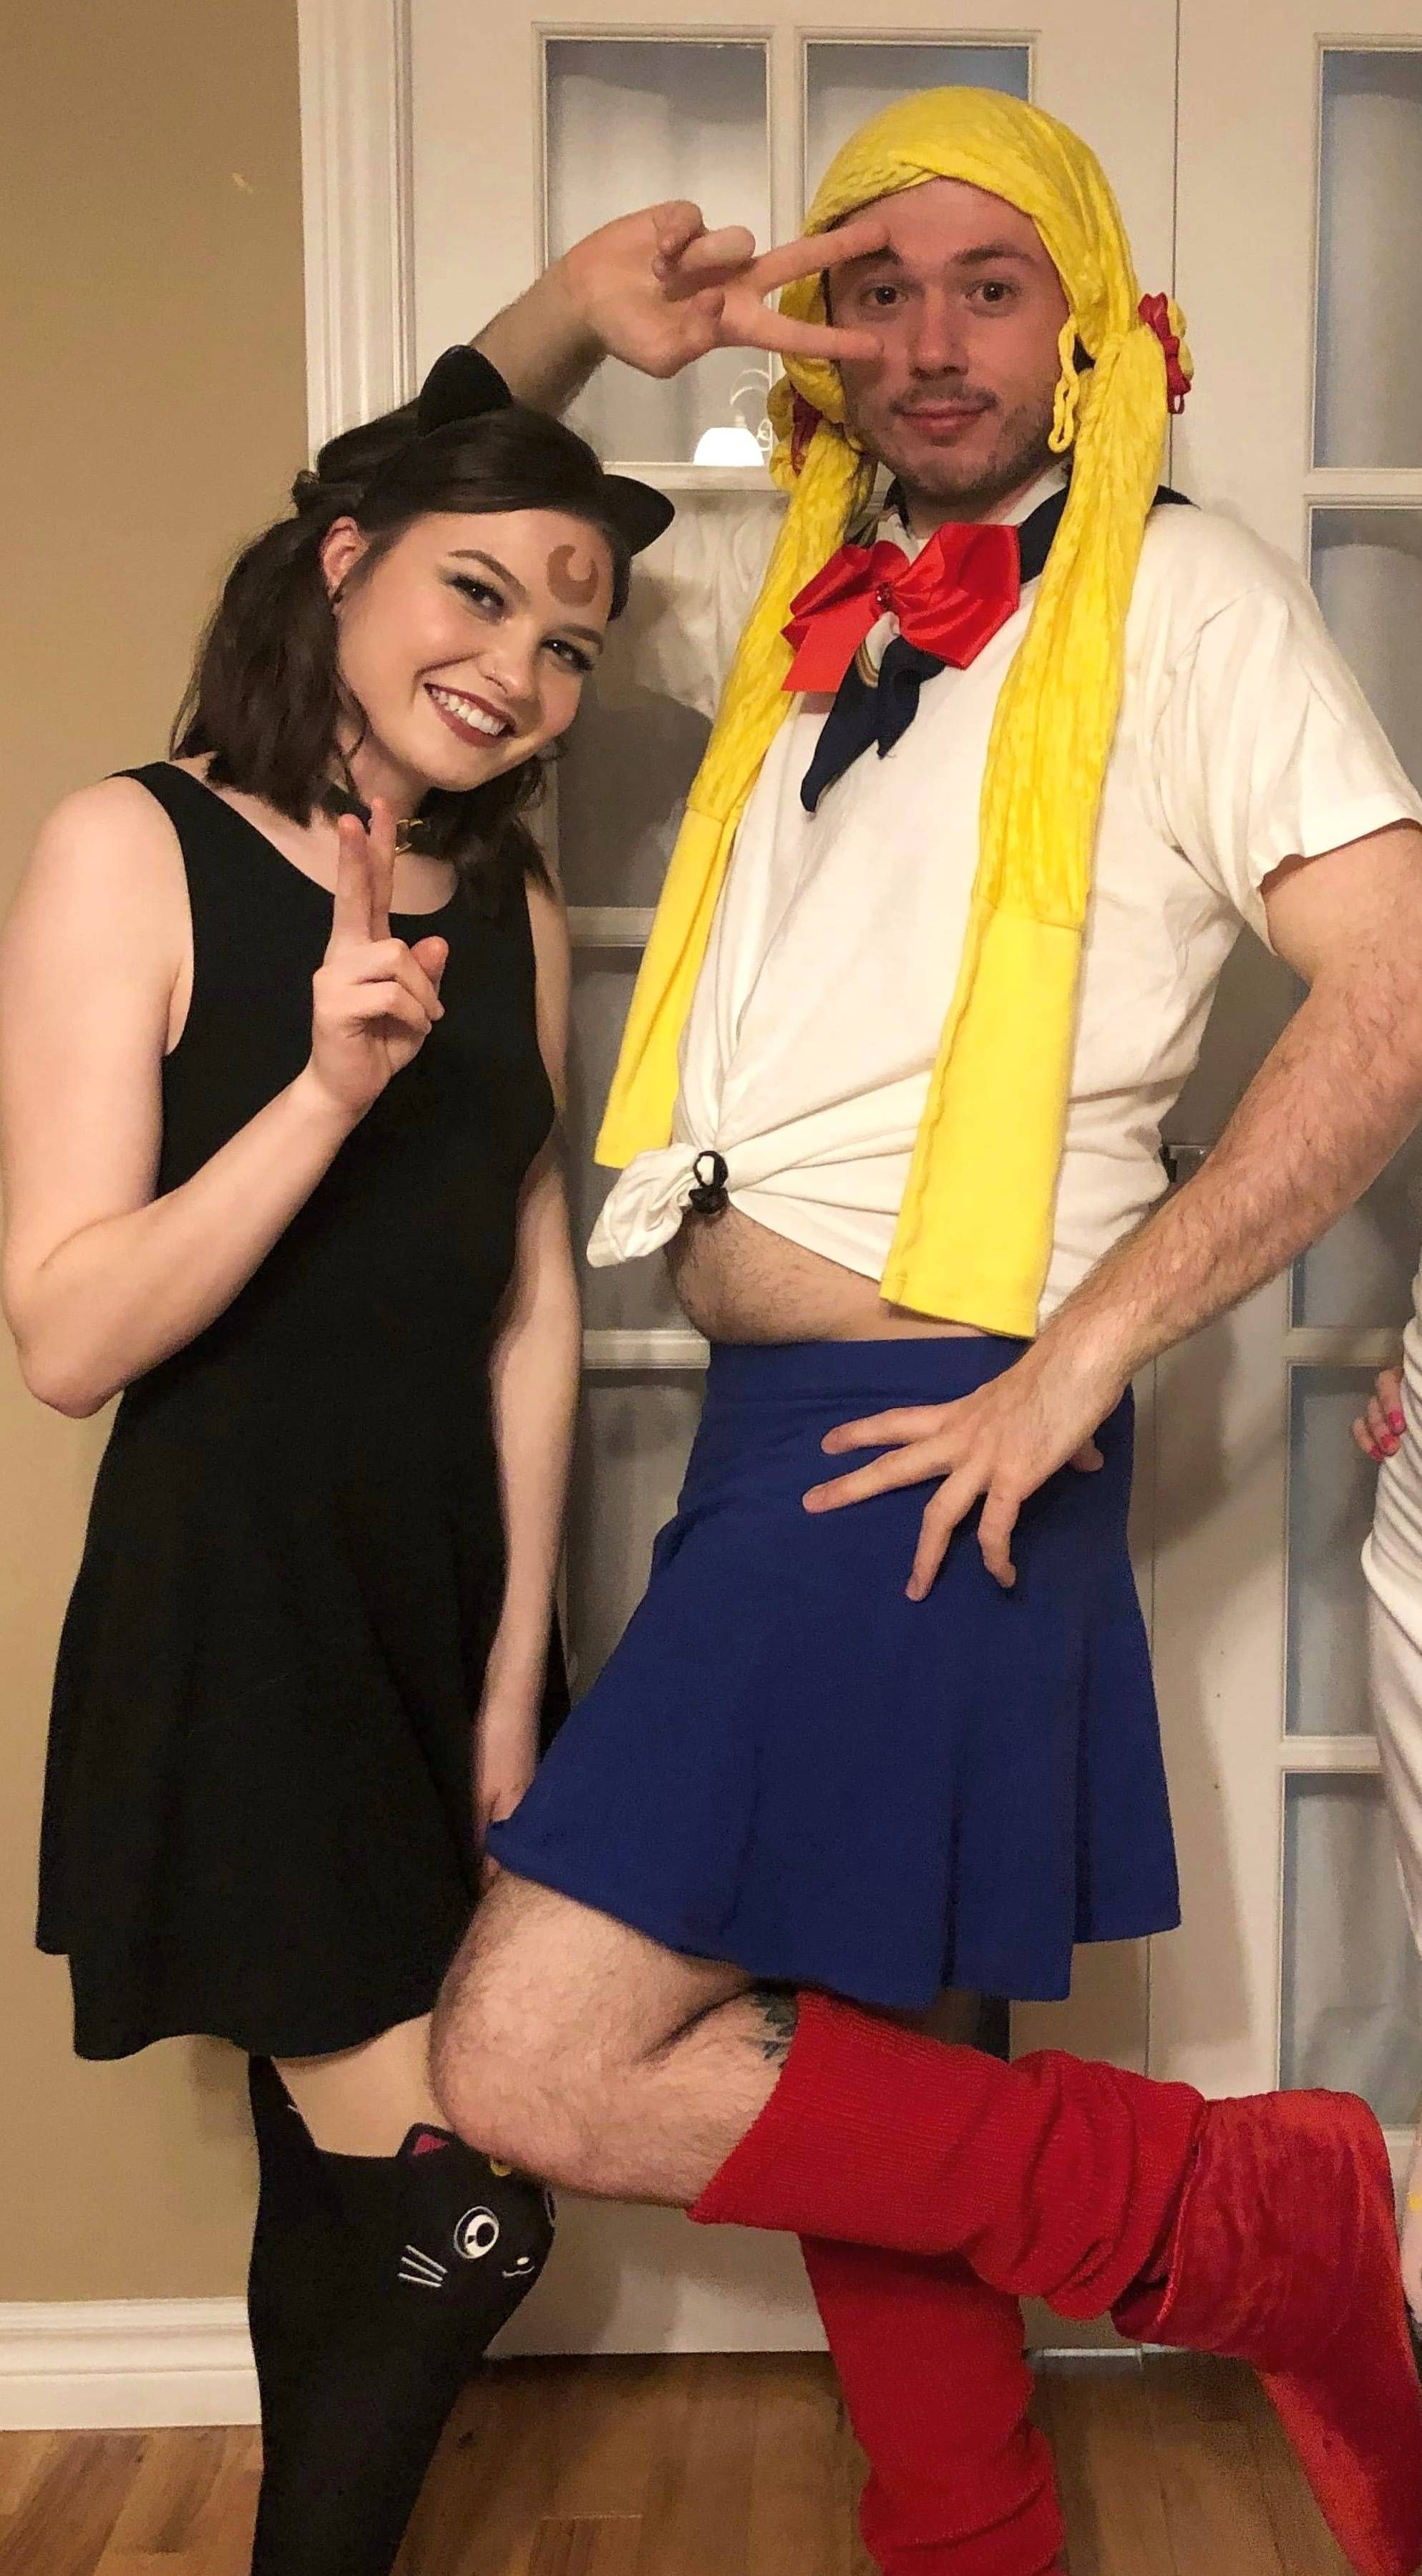 Told my bf I was going to go to a costume party as Luna and he shows up as the most busted Sailor Moon